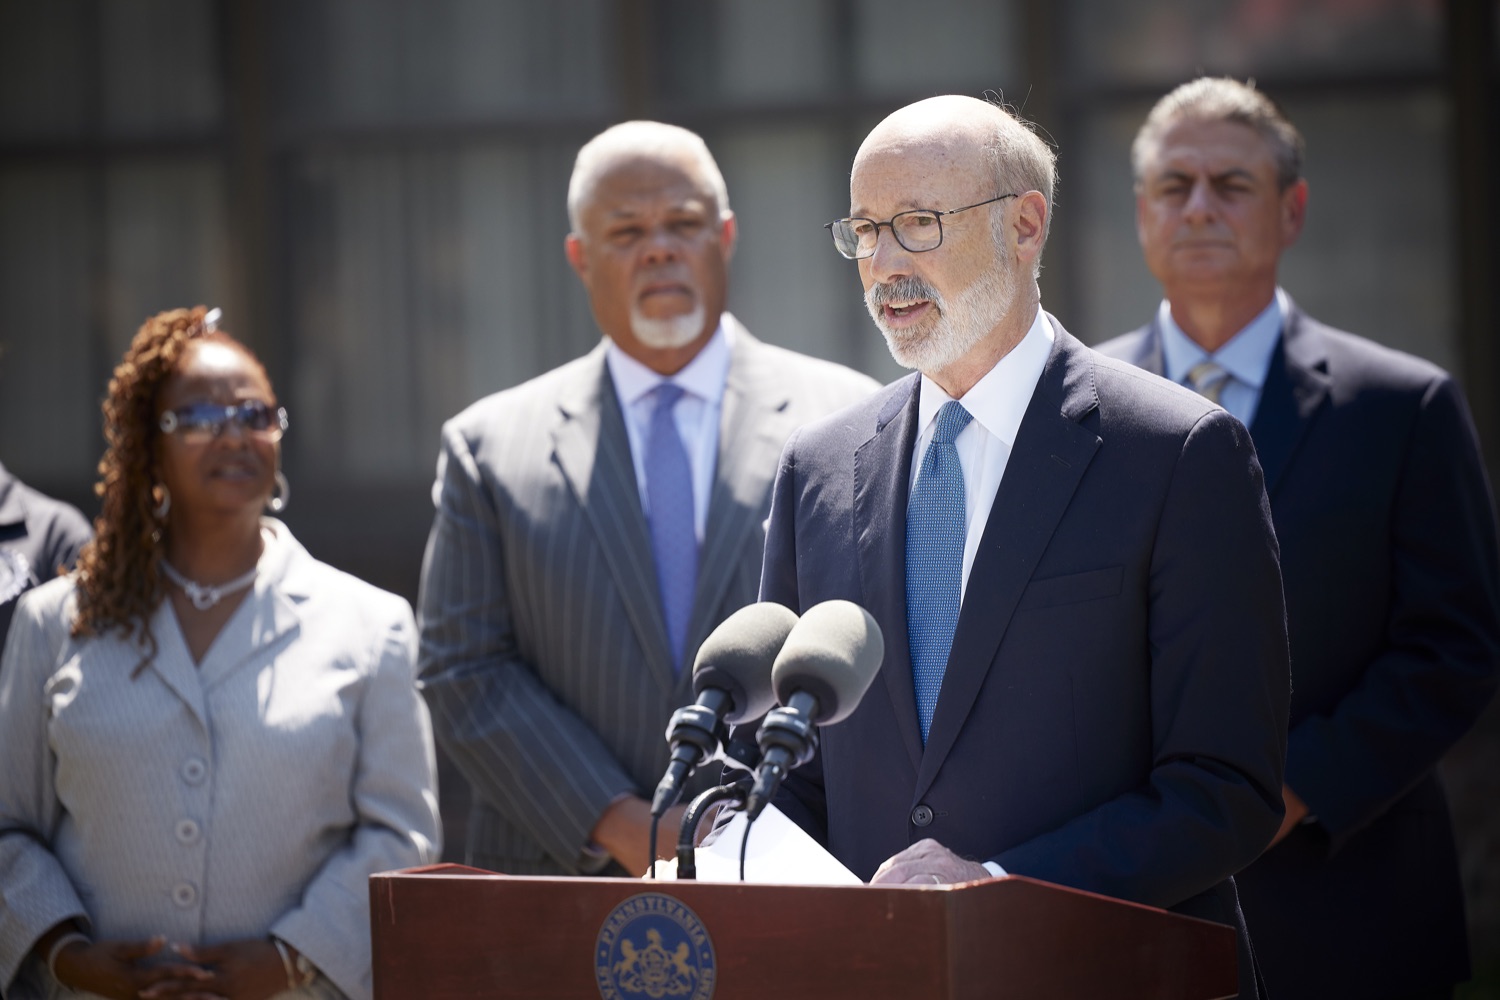 Pennsylvania Governor Tom Wolf speaks with the press.   Governor Tom Wolf was joined by state Representative David Delloso and stakeholders and community members to discuss the reintroduction of the PA Opportunity Program, which would send $2,000 checks directly to Pennsylvanians. I first proposed the PA Opportunity Program back in February, but Republican leaders in the General Assembly just wouldnt get on board with funding it in this years budget, said Gov. Wolf. However, as Ive traveled the commonwealth, Ive heard directly from so many people about how much this program would mean to them and their families. Im not going to stop fighting until the people of Pennsylvania get the help they need and deserve. Folcroft, PA  August 2, 2022<br><a href="https://filesource.amperwave.net/commonwealthofpa/photo/22070_gov_opportunityFund_dz_021.JPG" target="_blank">⇣ Download Photo</a>